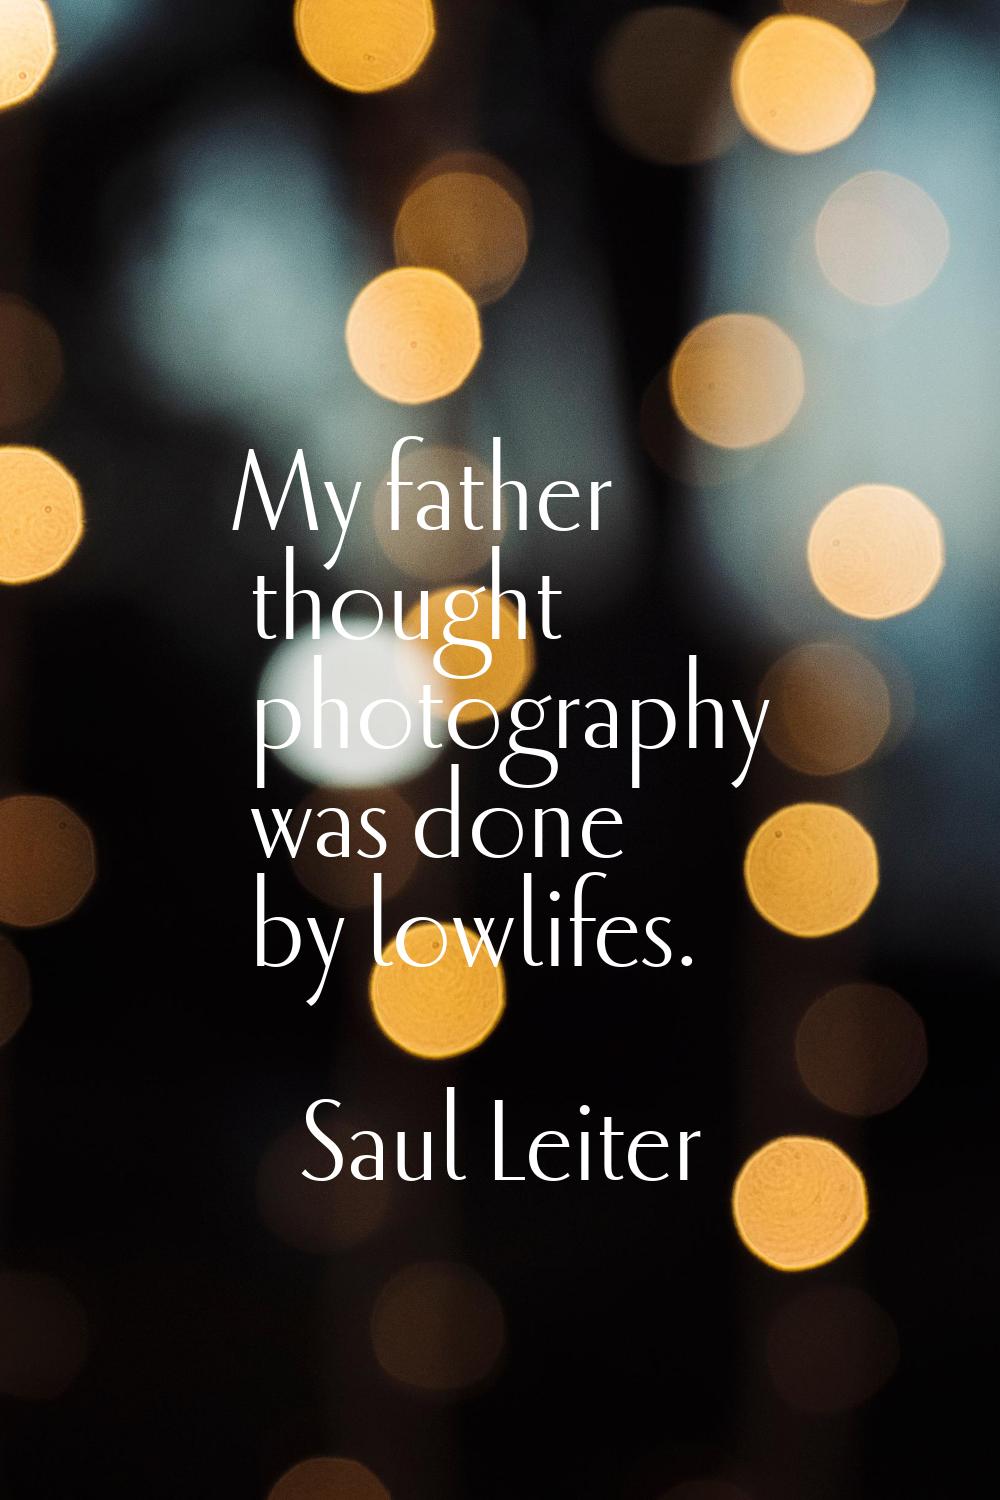 My father thought photography was done by lowlifes.